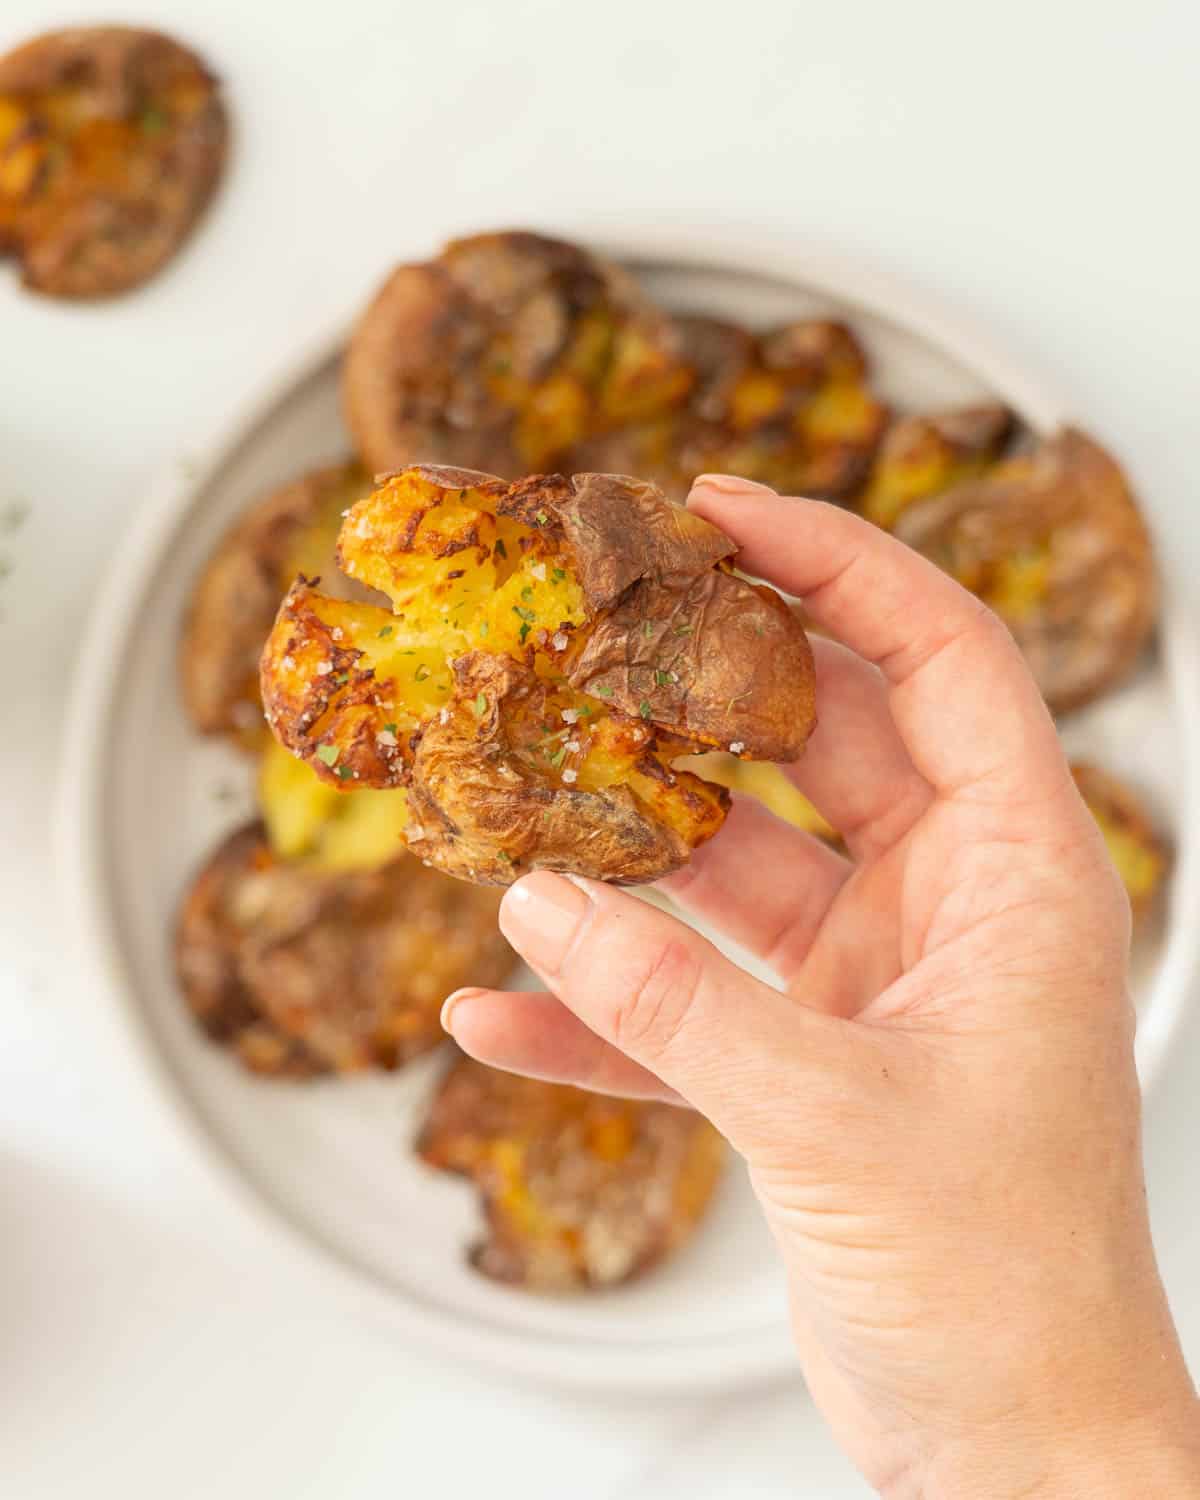 A golden brown smashed potato with skin on being held above a plate of smashed potatoes.